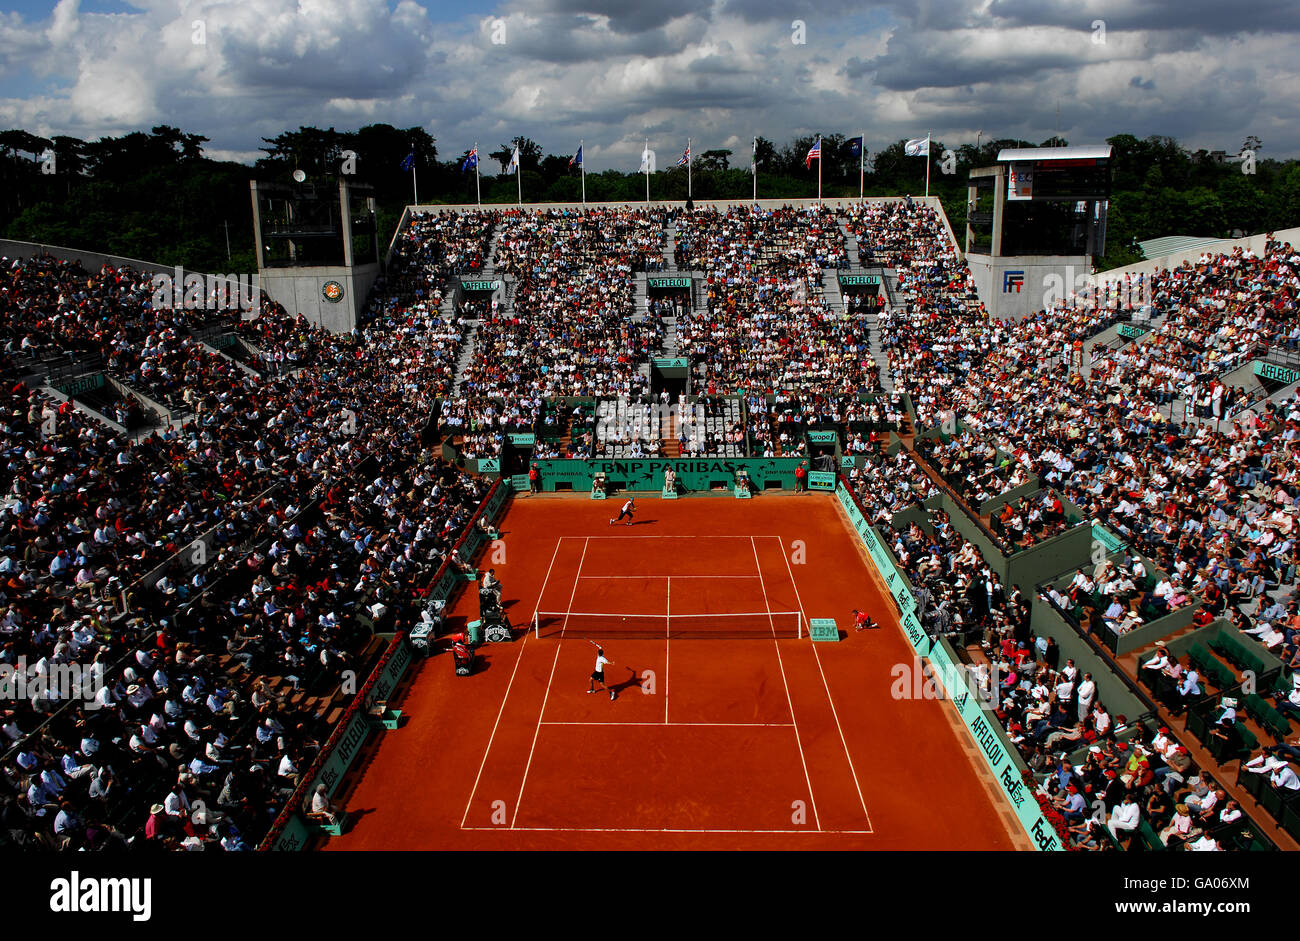 General view of Court Suzanne Lenglen as Flavio Cipolla of Italy faces Rafael Nadal of Spain in the second round of the French Open Stock Photo